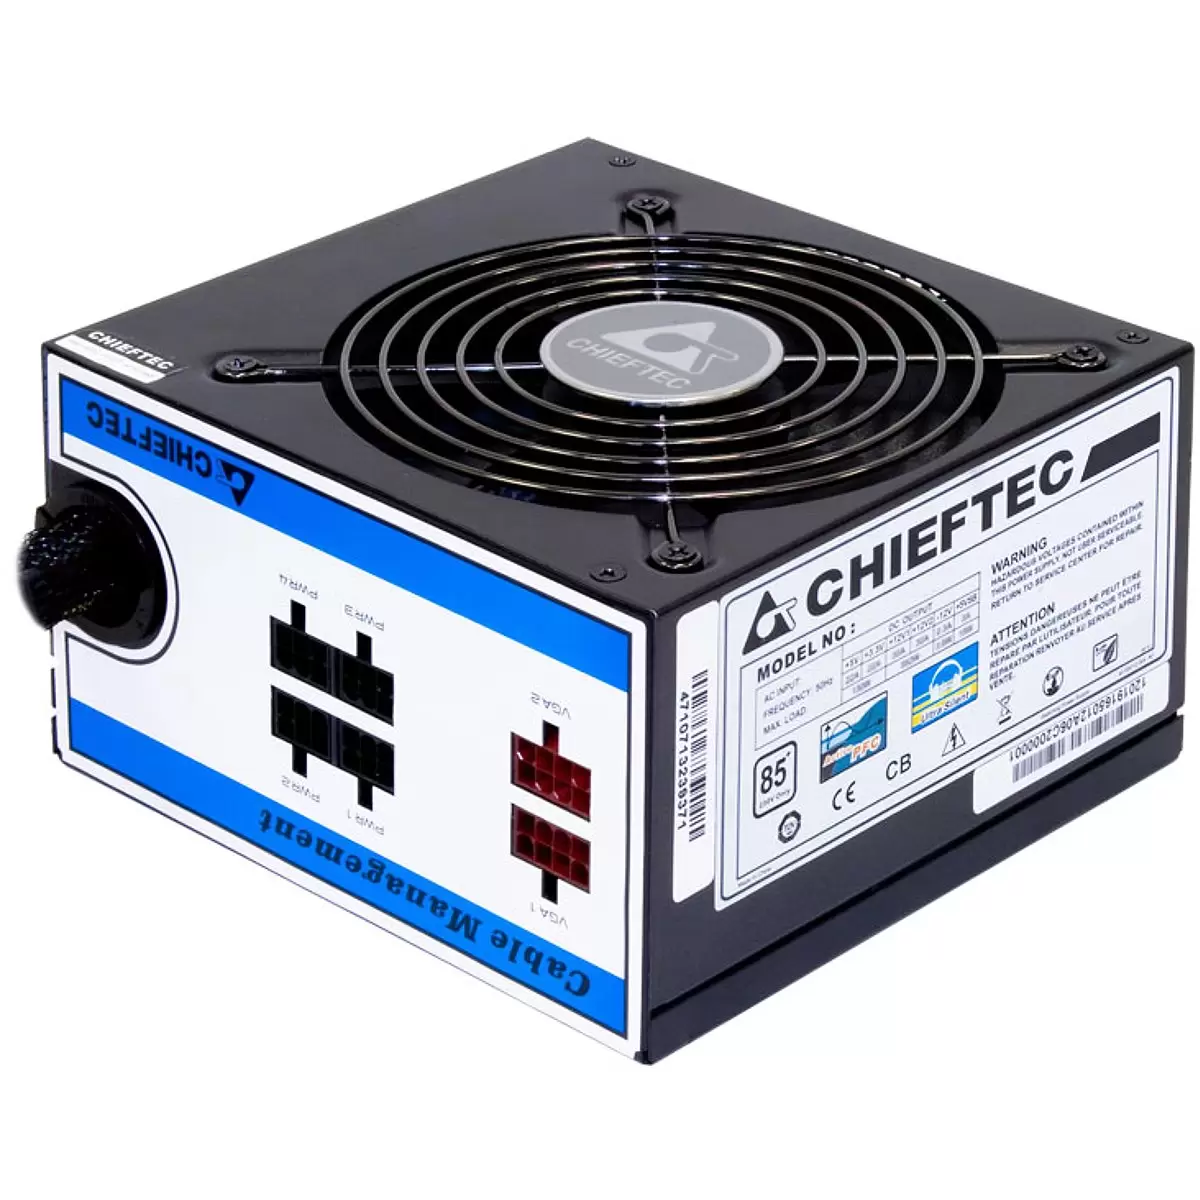 CHIEFTEC 750W PSU  85  230V W CABLE MNG